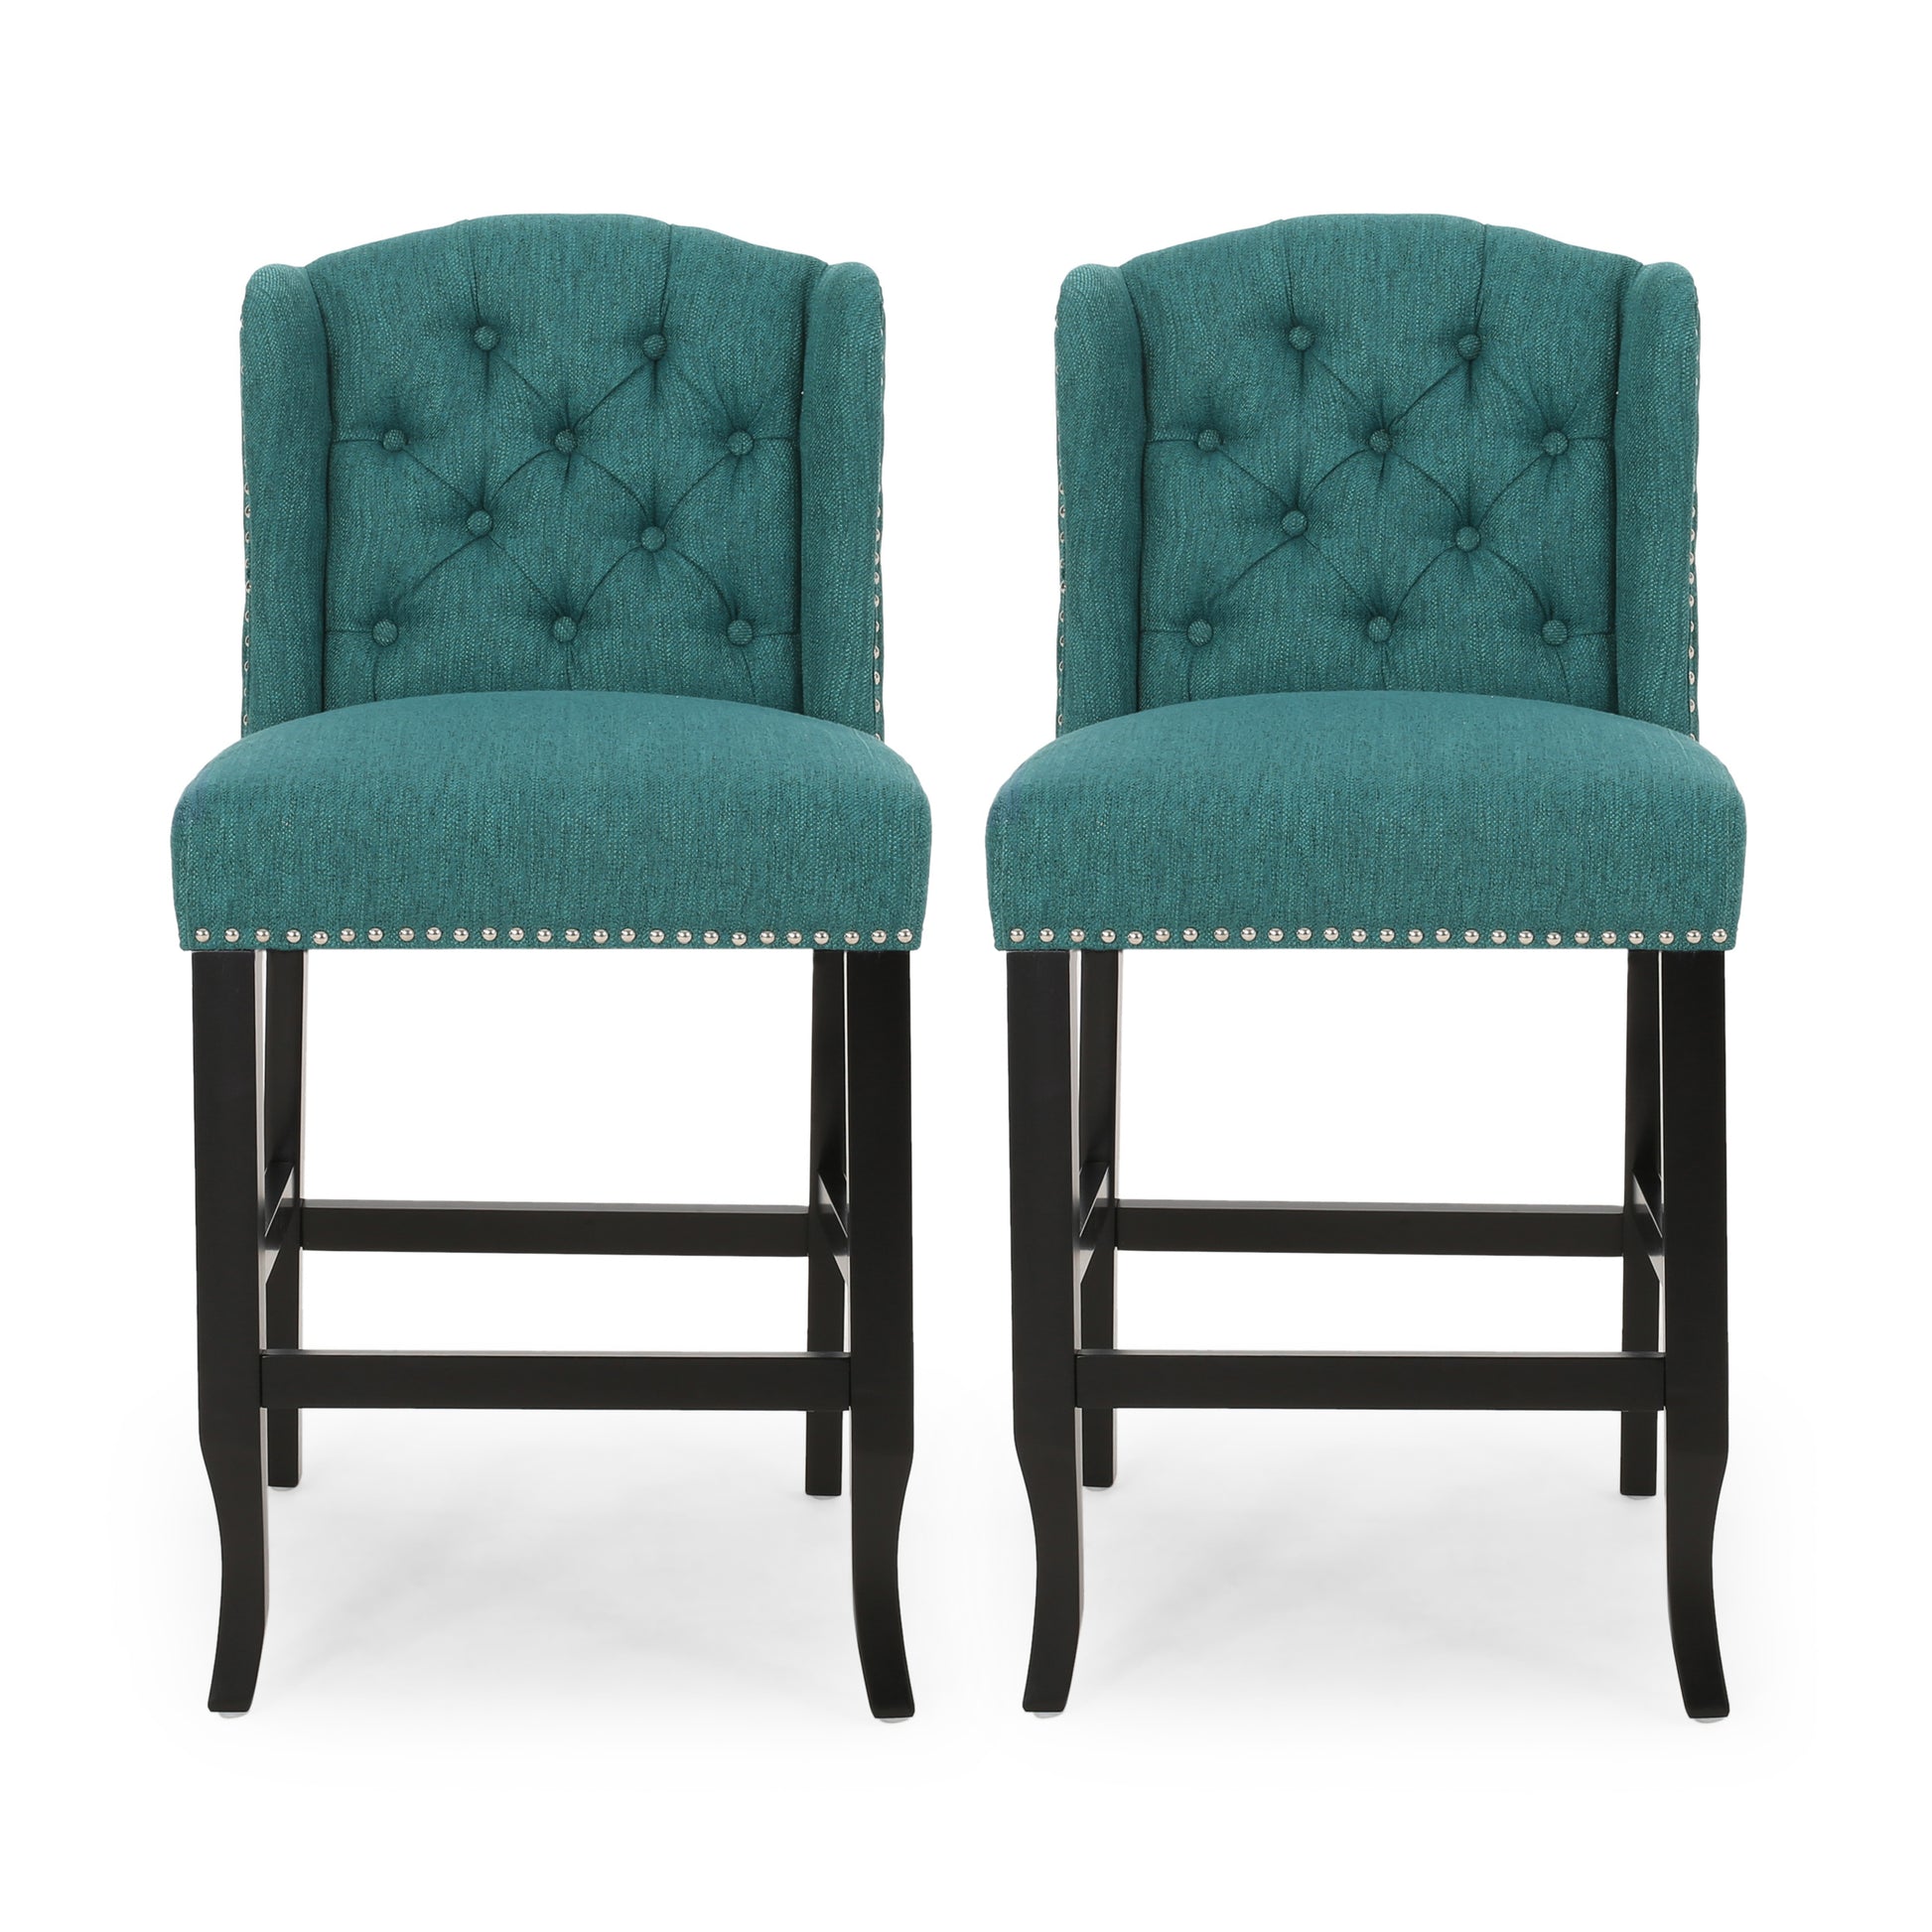 Vienna Contemporary Fabric Tufted Wingback 27 Inch teal-fabric